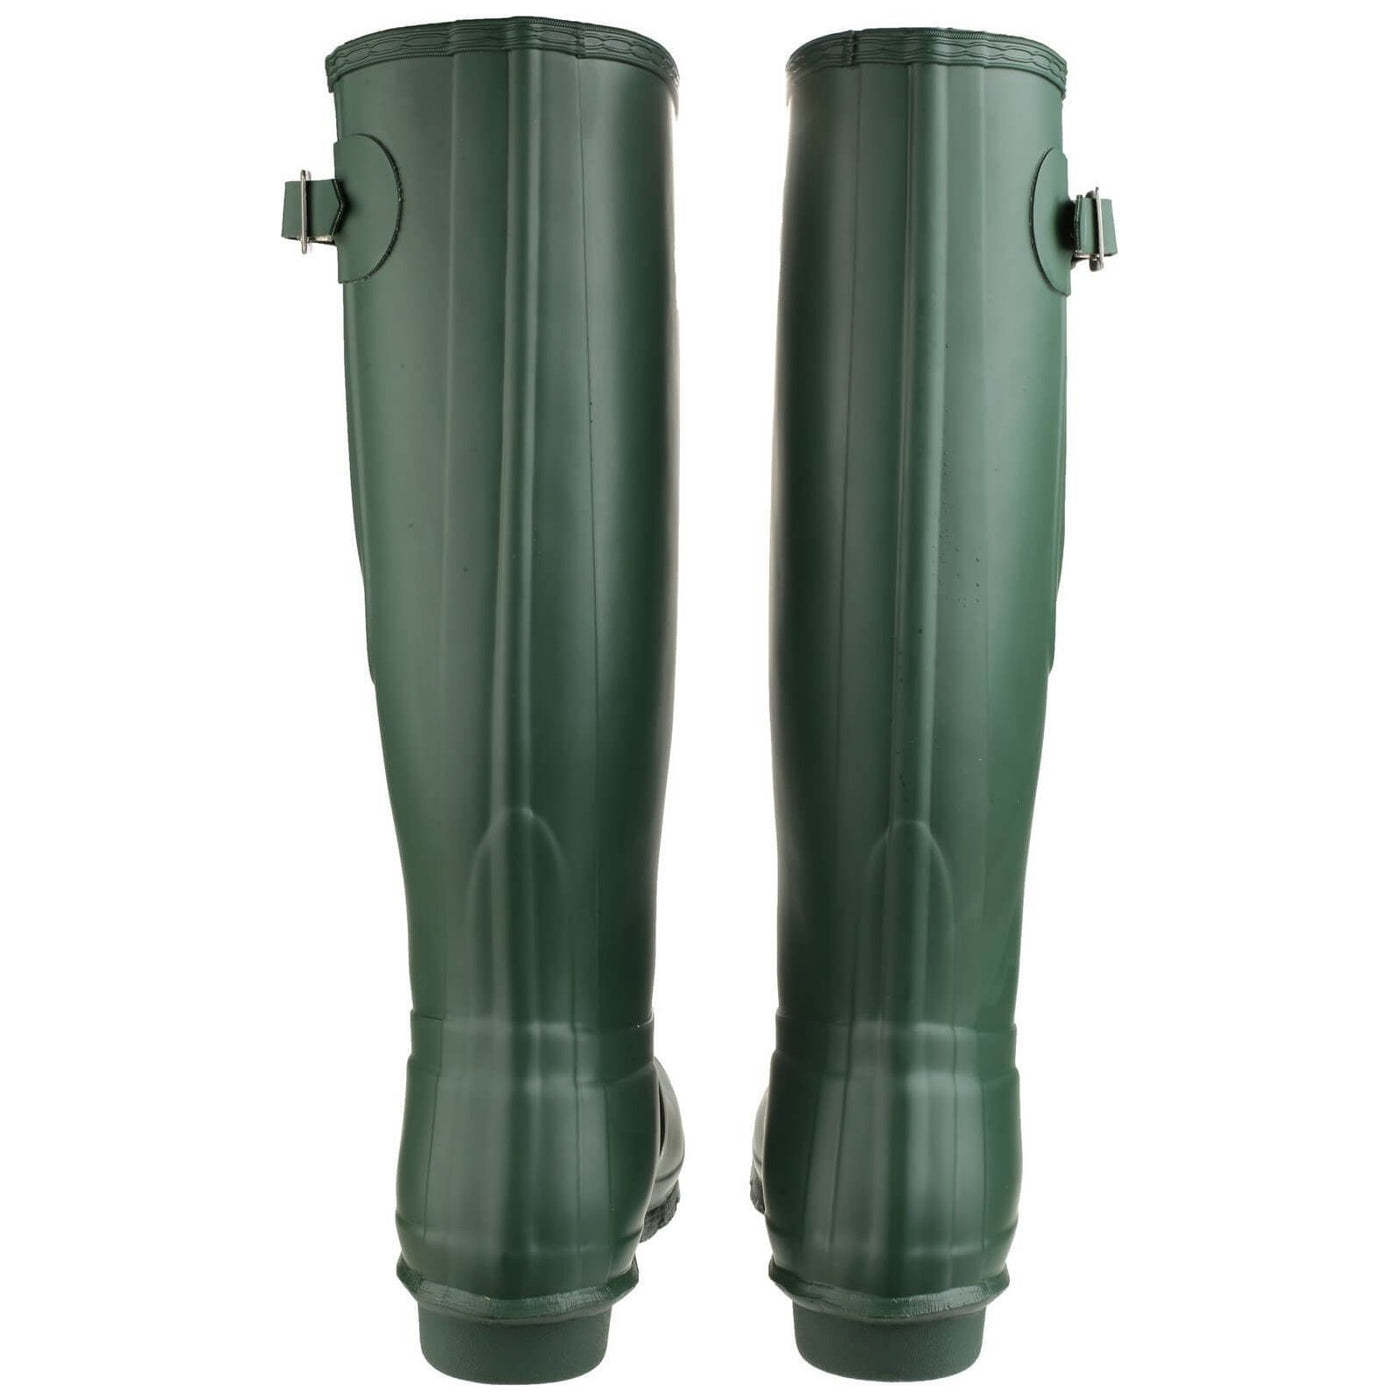 Cotswold Windsor High Wellies-Green -7